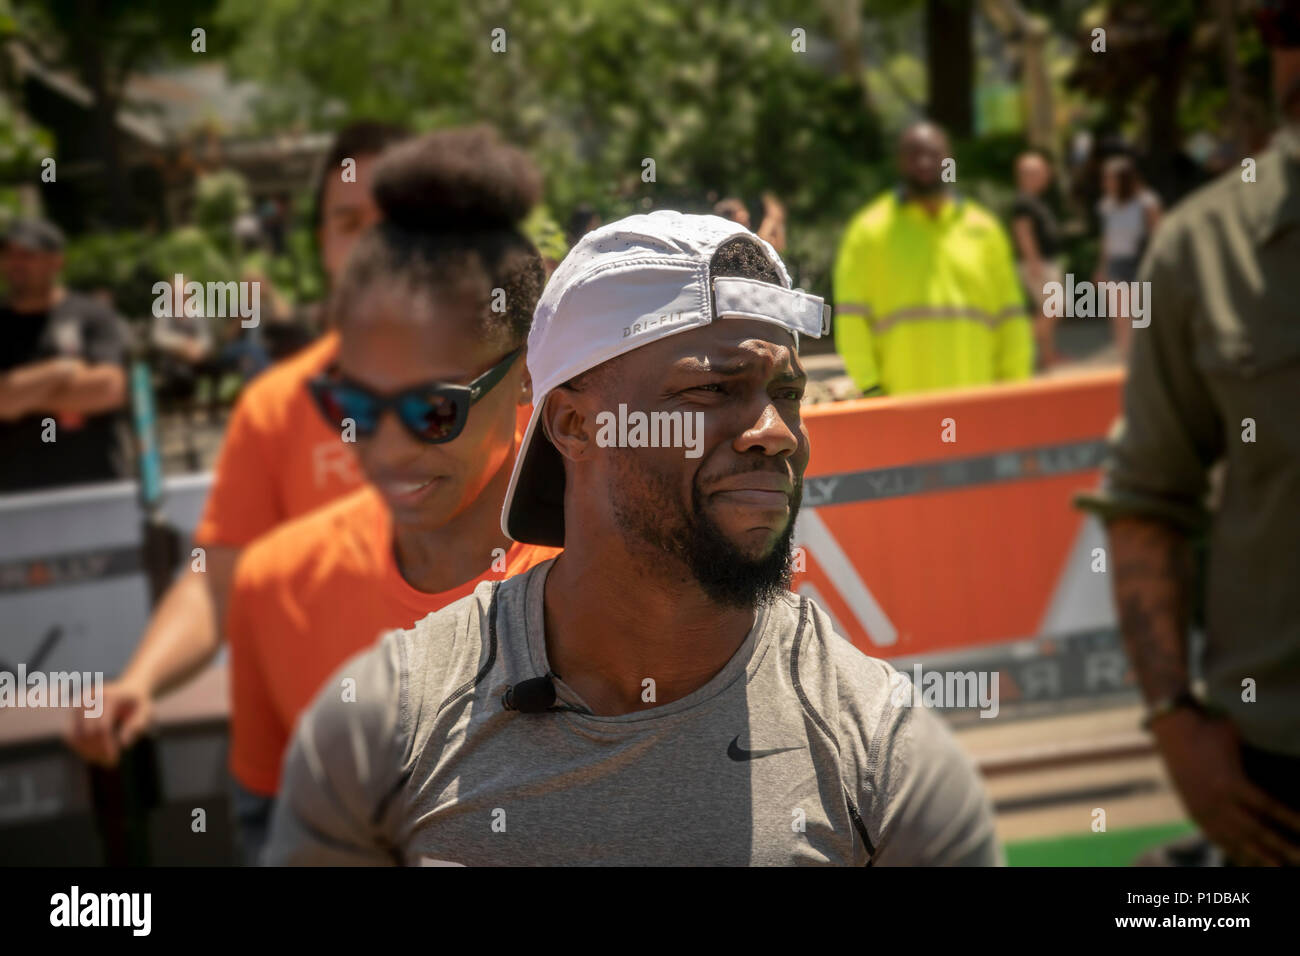 Comedian/Actor Kevin Hart participates in the "Rally on the Road"  healthfest sponsored by Rally Health in Flatiron Plaza in New York on  Thursday, May 24, 2018. Rally Health is a digital platform